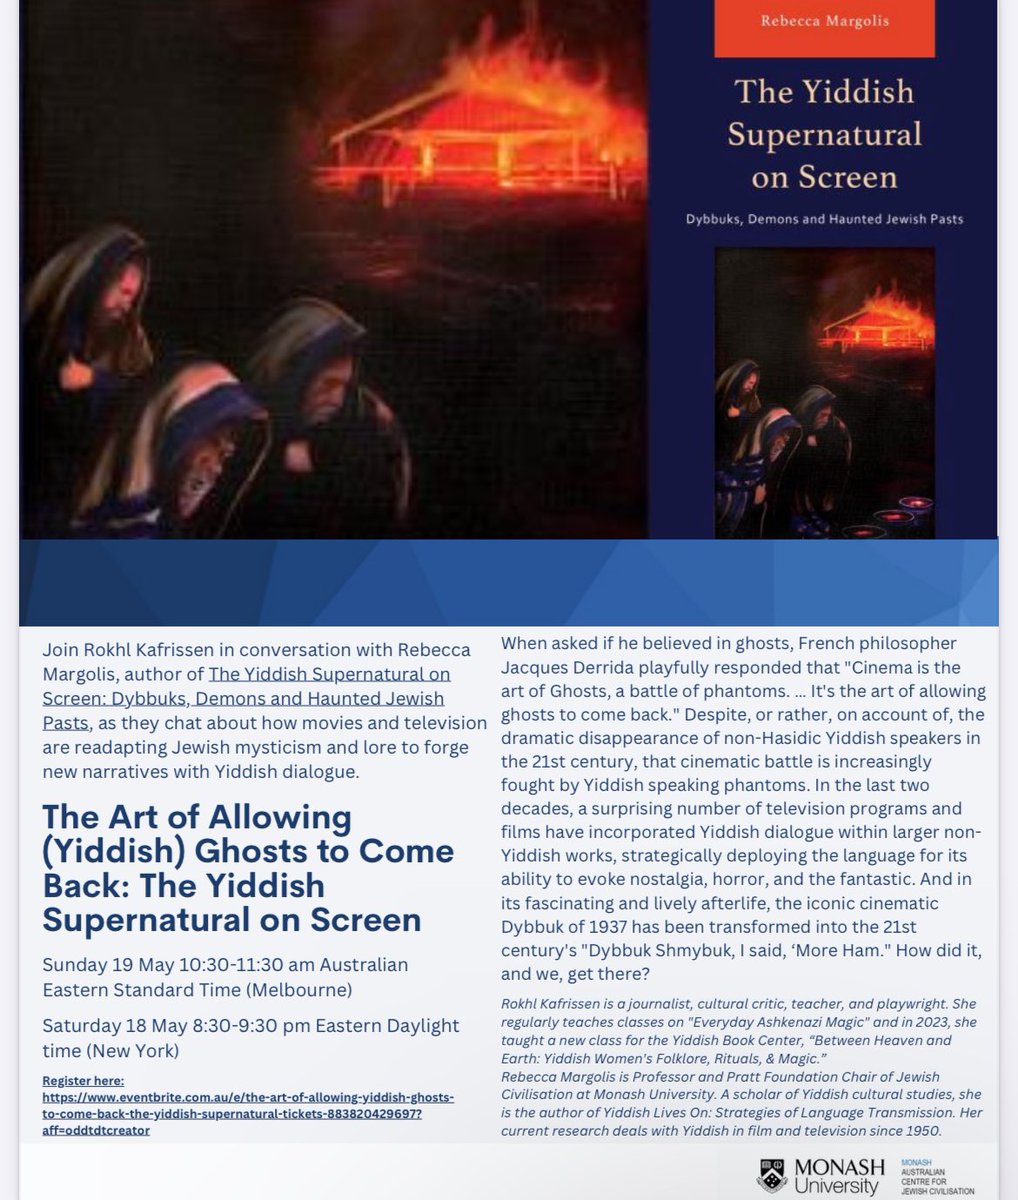 Hey hey! There's a dybbuk in my screen! Come talk about it with me and scholar and author of 'The Yiddish Supernatural Onscreen' Rebecca Margolis! This Saturday night, for east coast, northern hemisphere folks, Sunday for Aussies. Woo! 👻